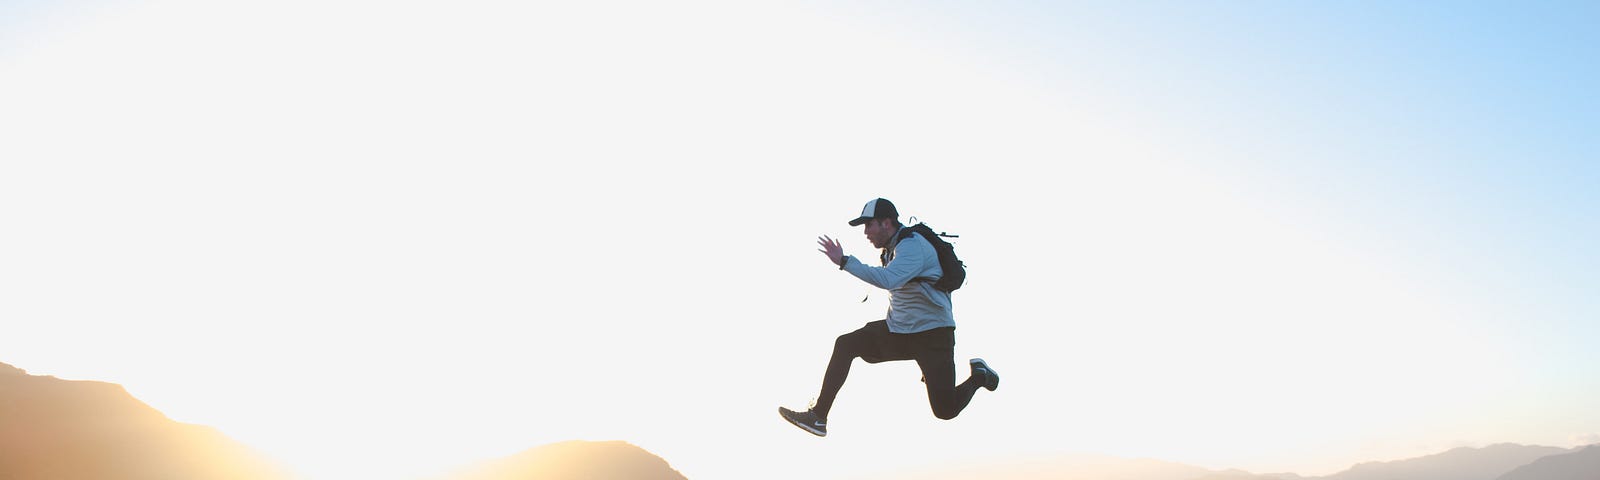 Jumping while running.